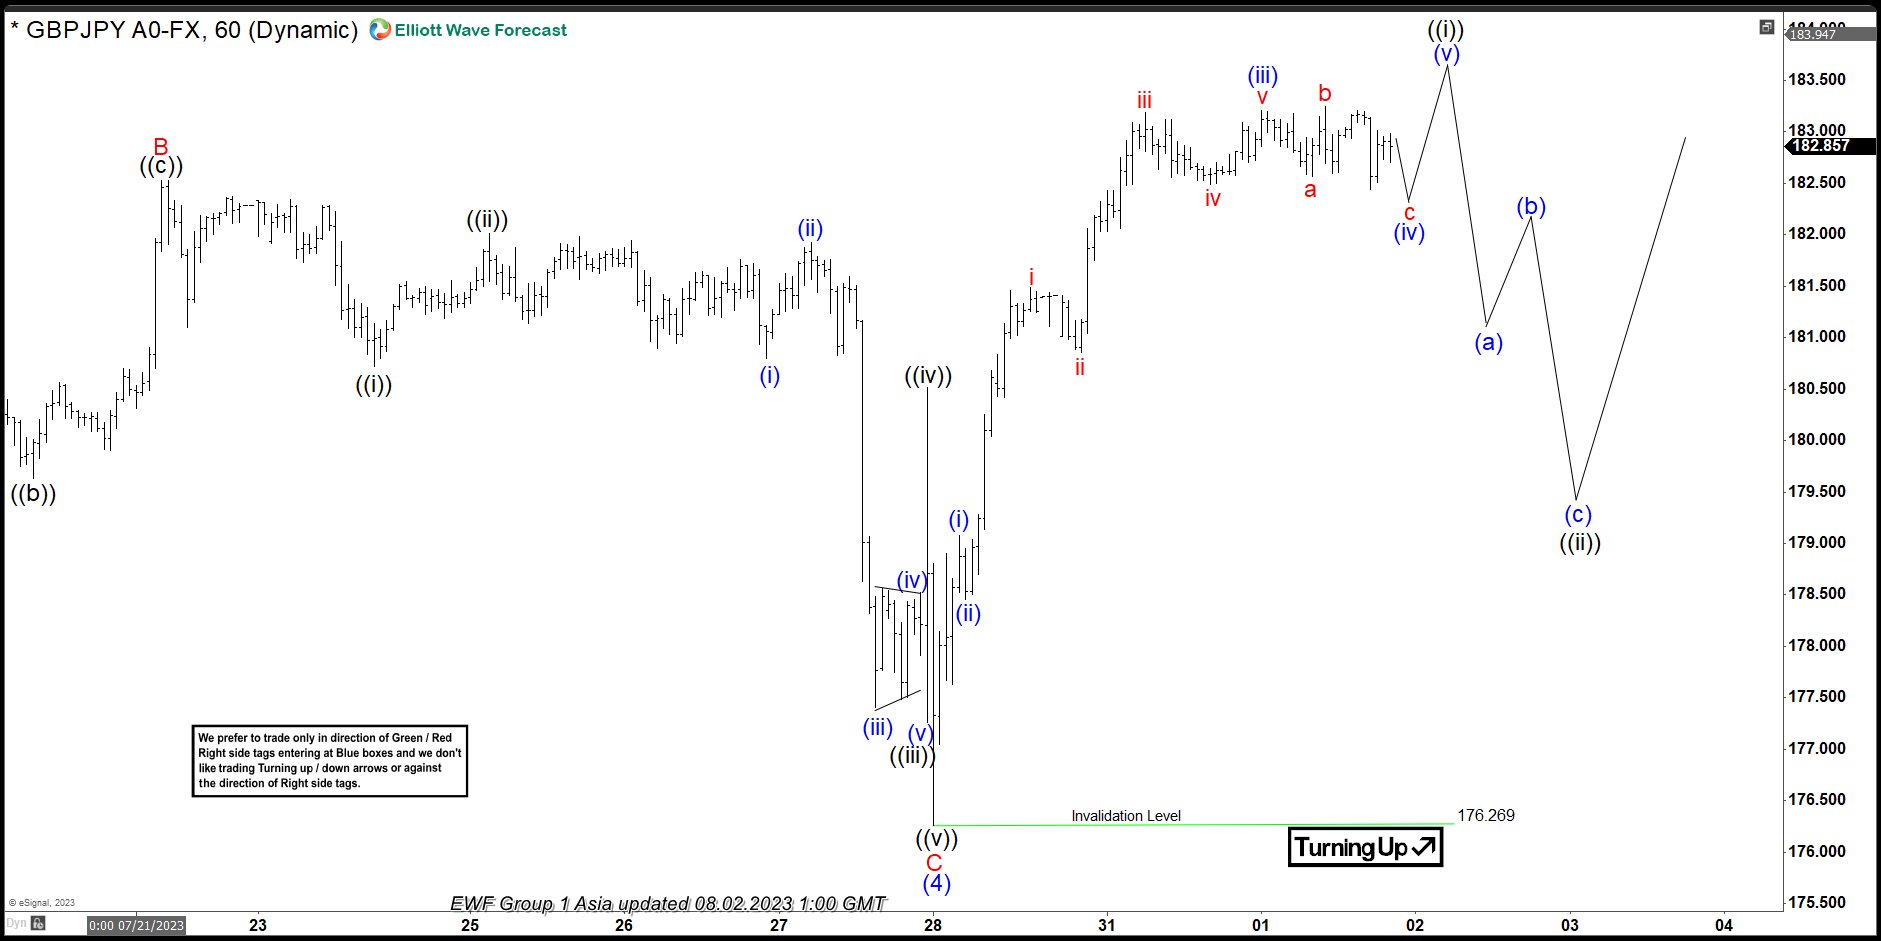 GBPJPY 3 Wave Pullback Coming After ending Impulse Rally